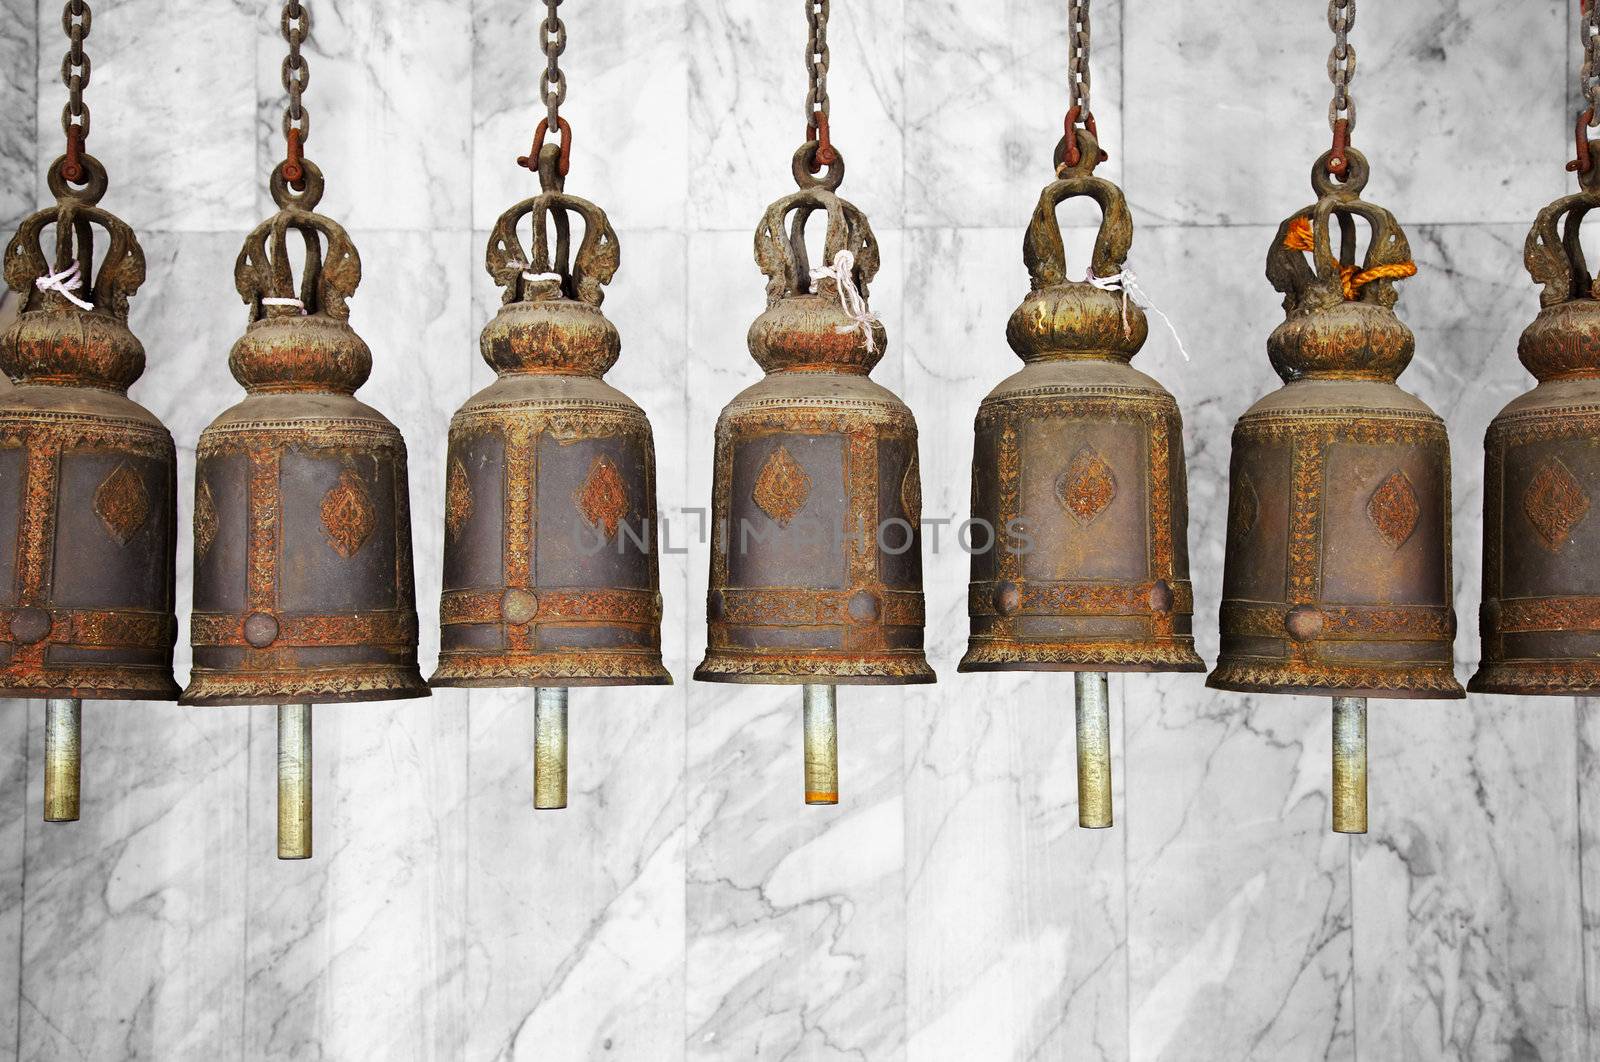 Bells in a Buddhist temple by pzaxe